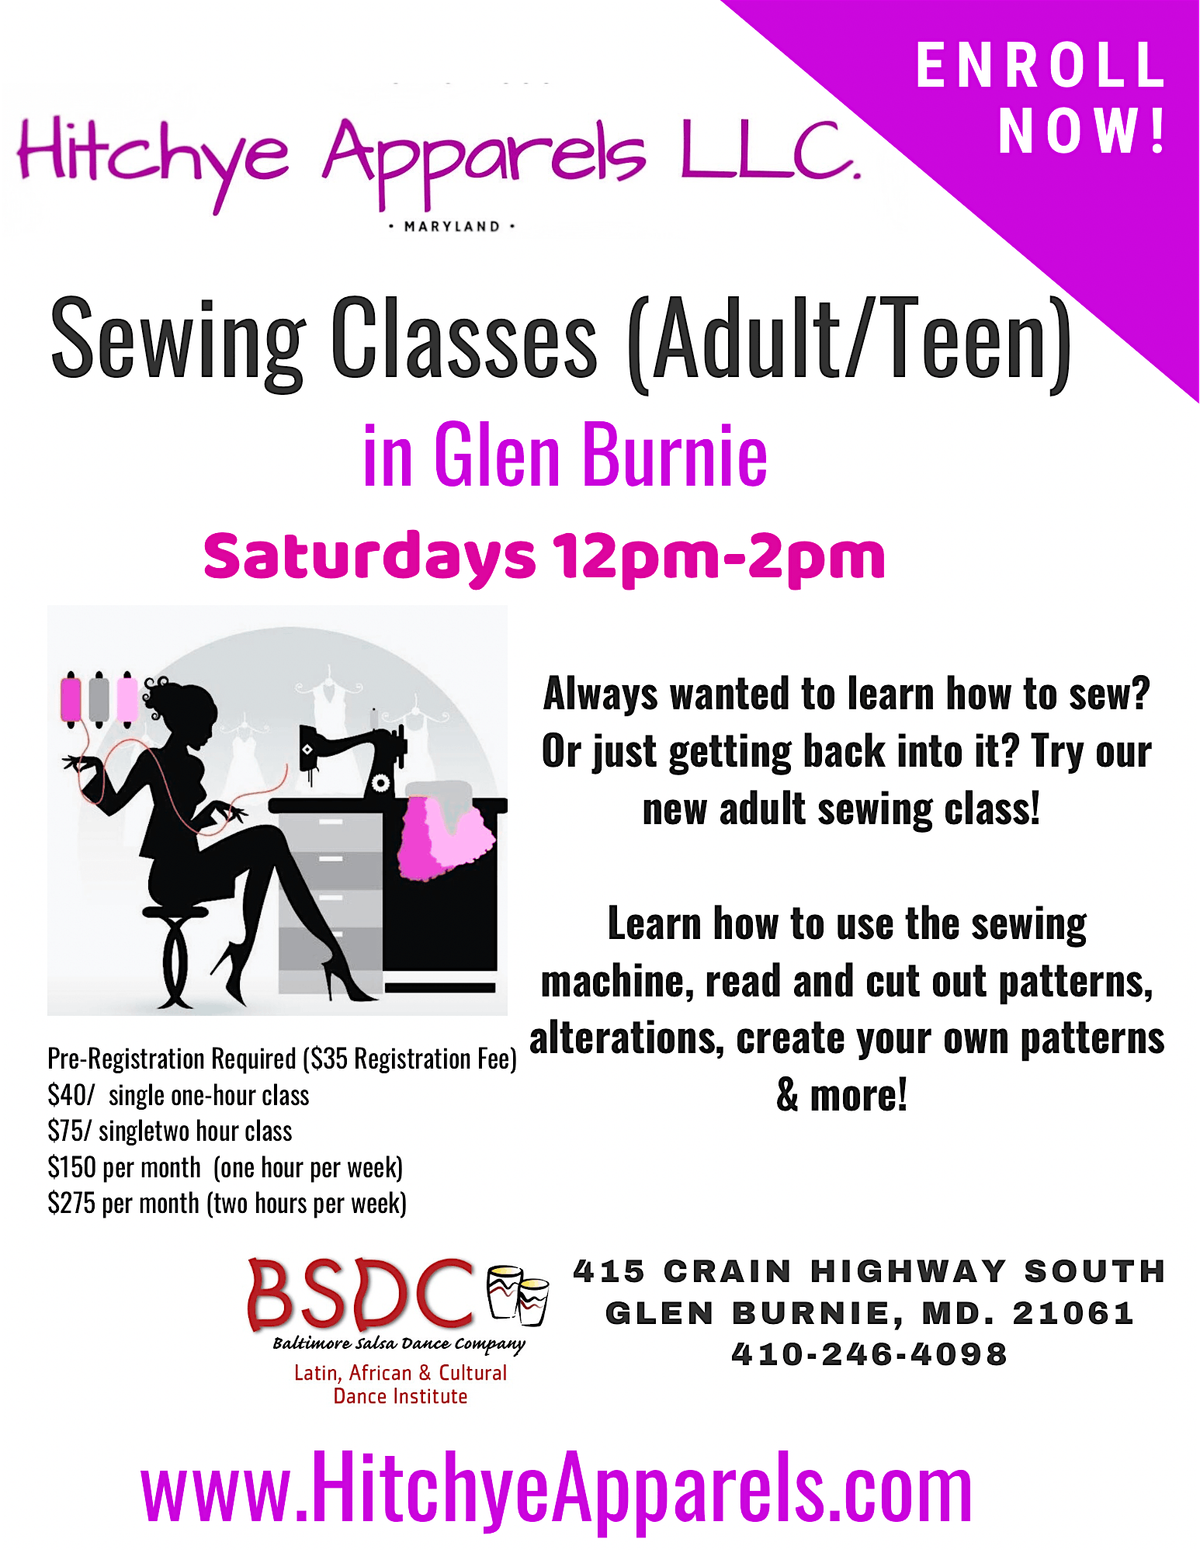 Sewing lessons for Adults\/Teens! Glen Burnie!